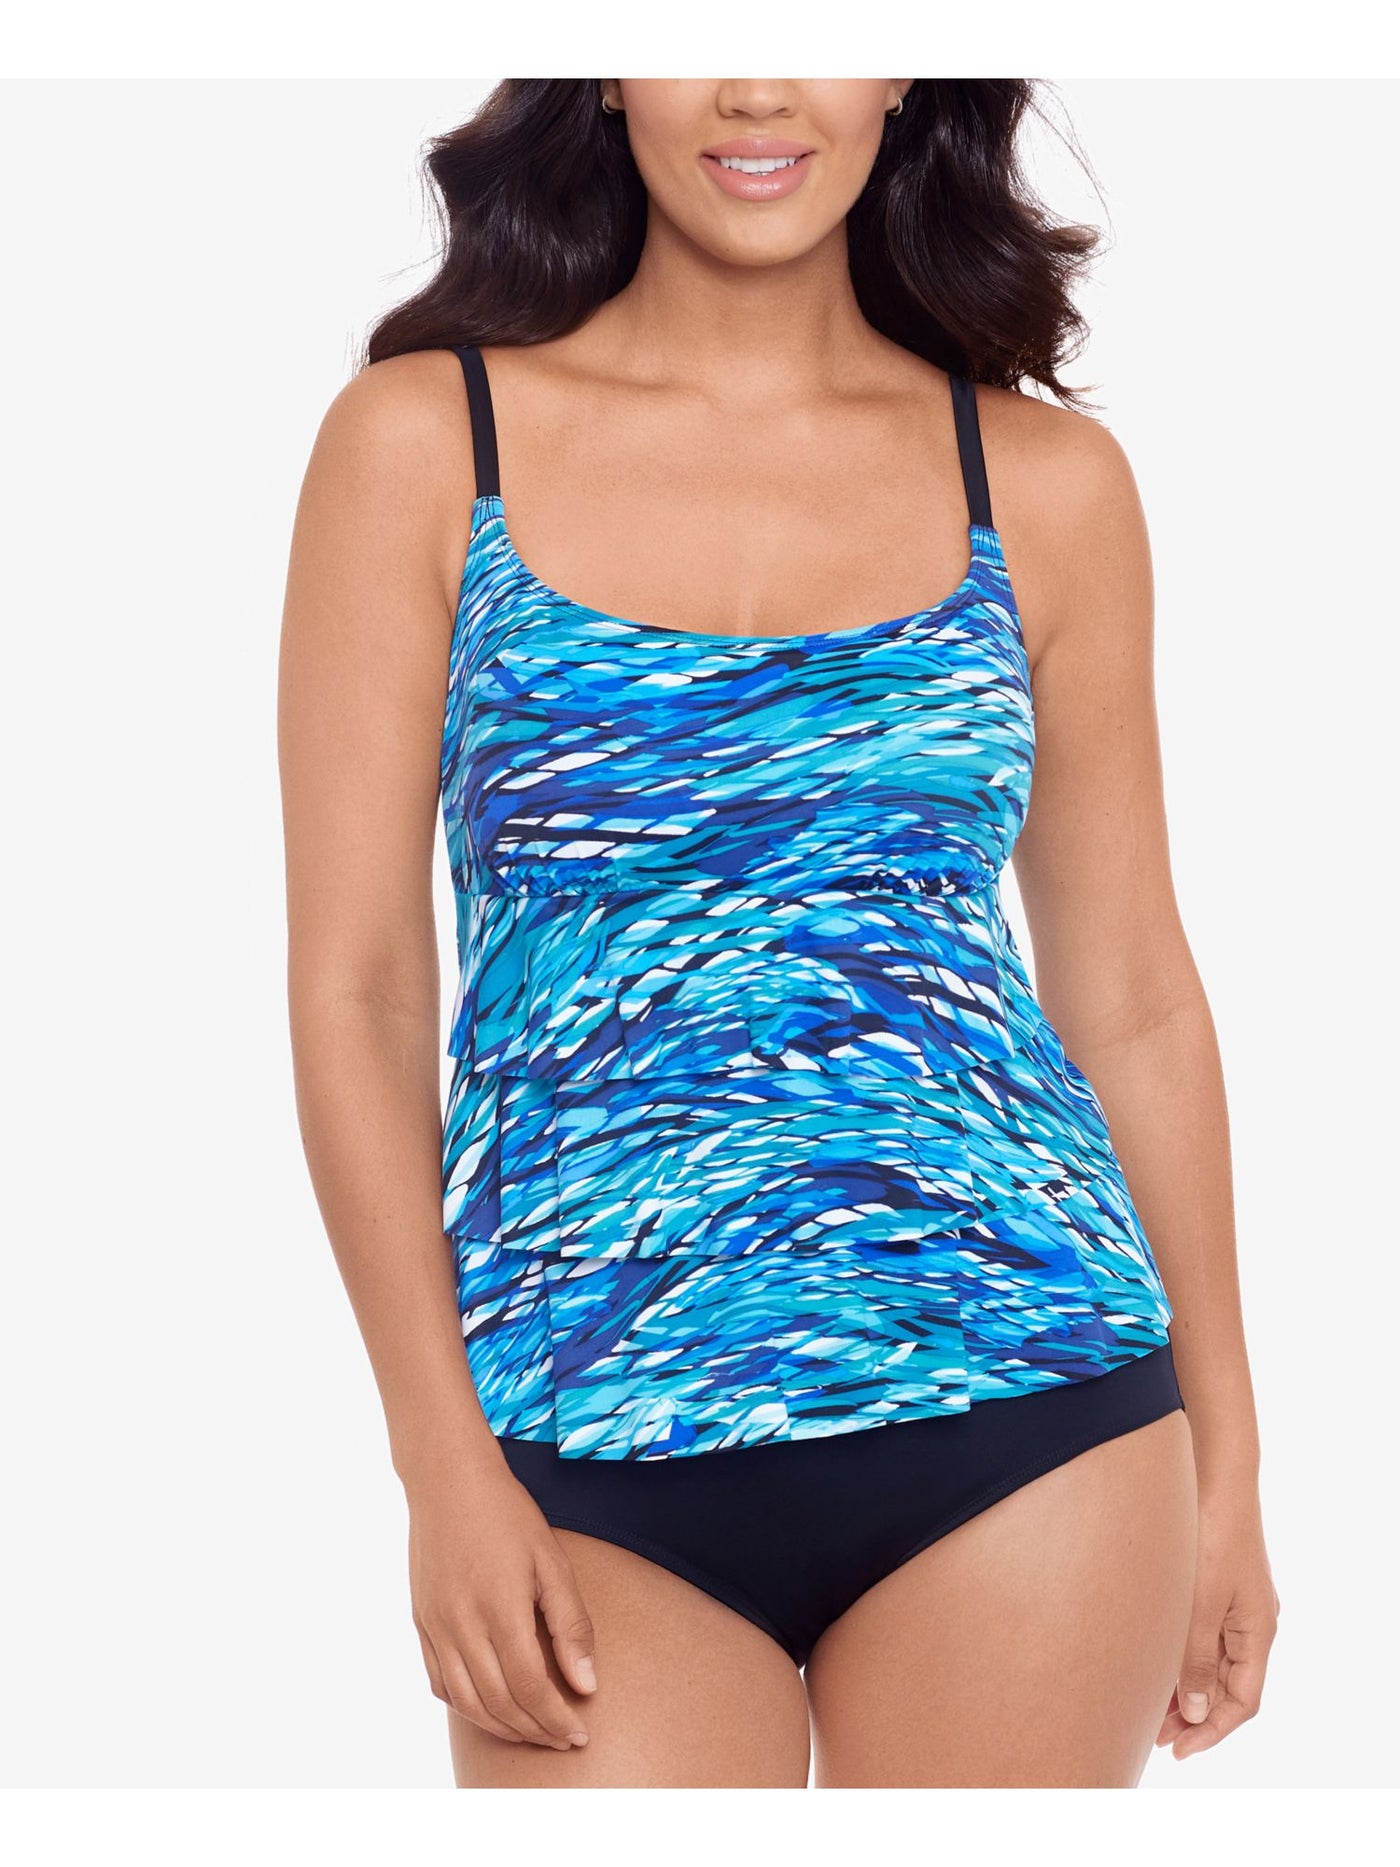 SWIM SOLUTIONS Women's Blue Patterned Stretch Tummy Control Lined Tiered Adjustable Fixed Cups Scoop Neck One Piece Swimsuit 10